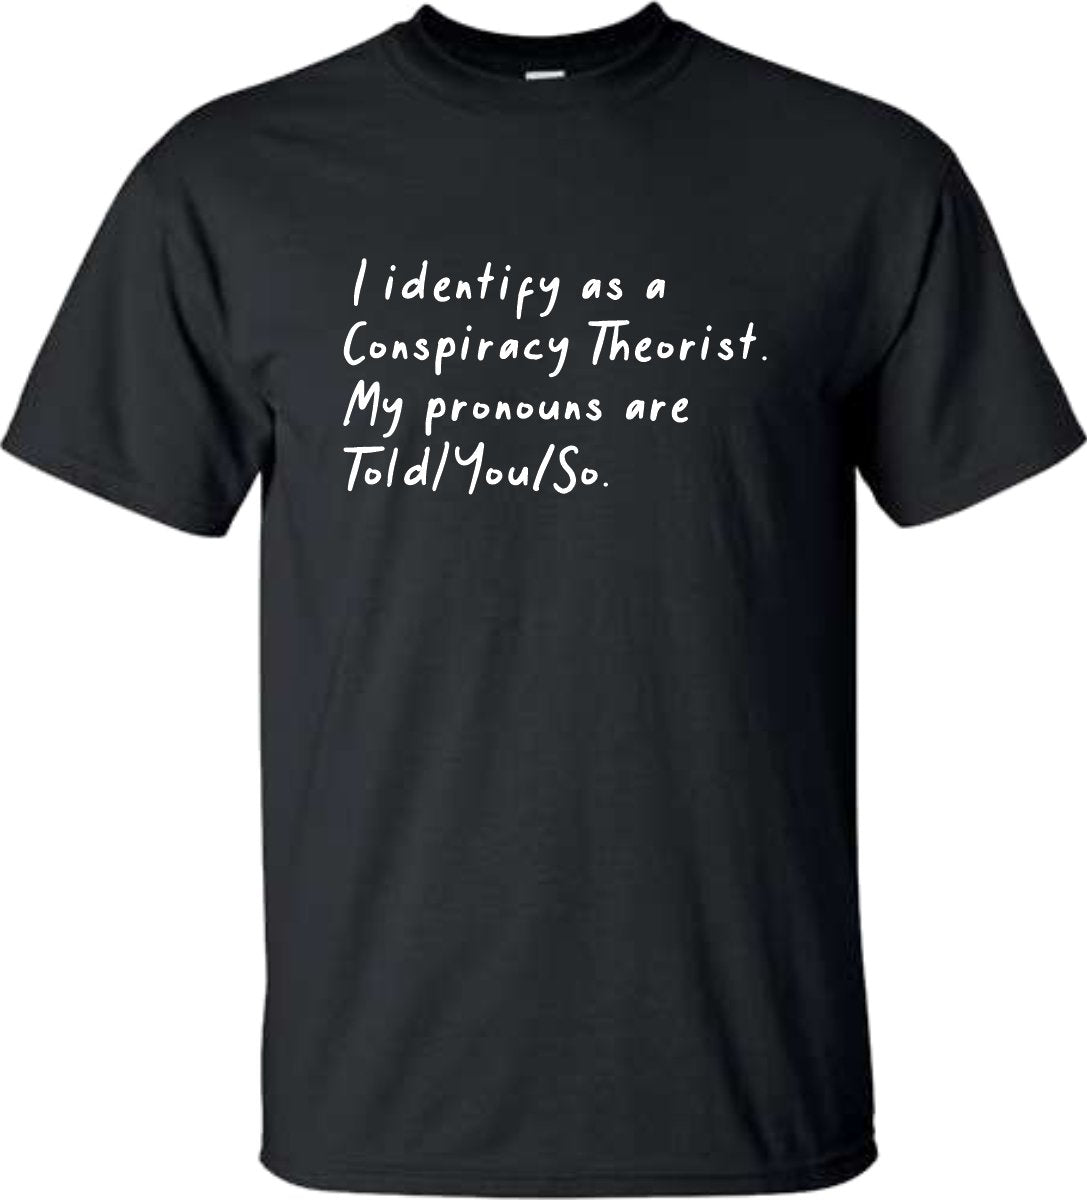 I identify as a conspiracy theorist, my pronouns are told/you/so t shirt - SBS T Shop